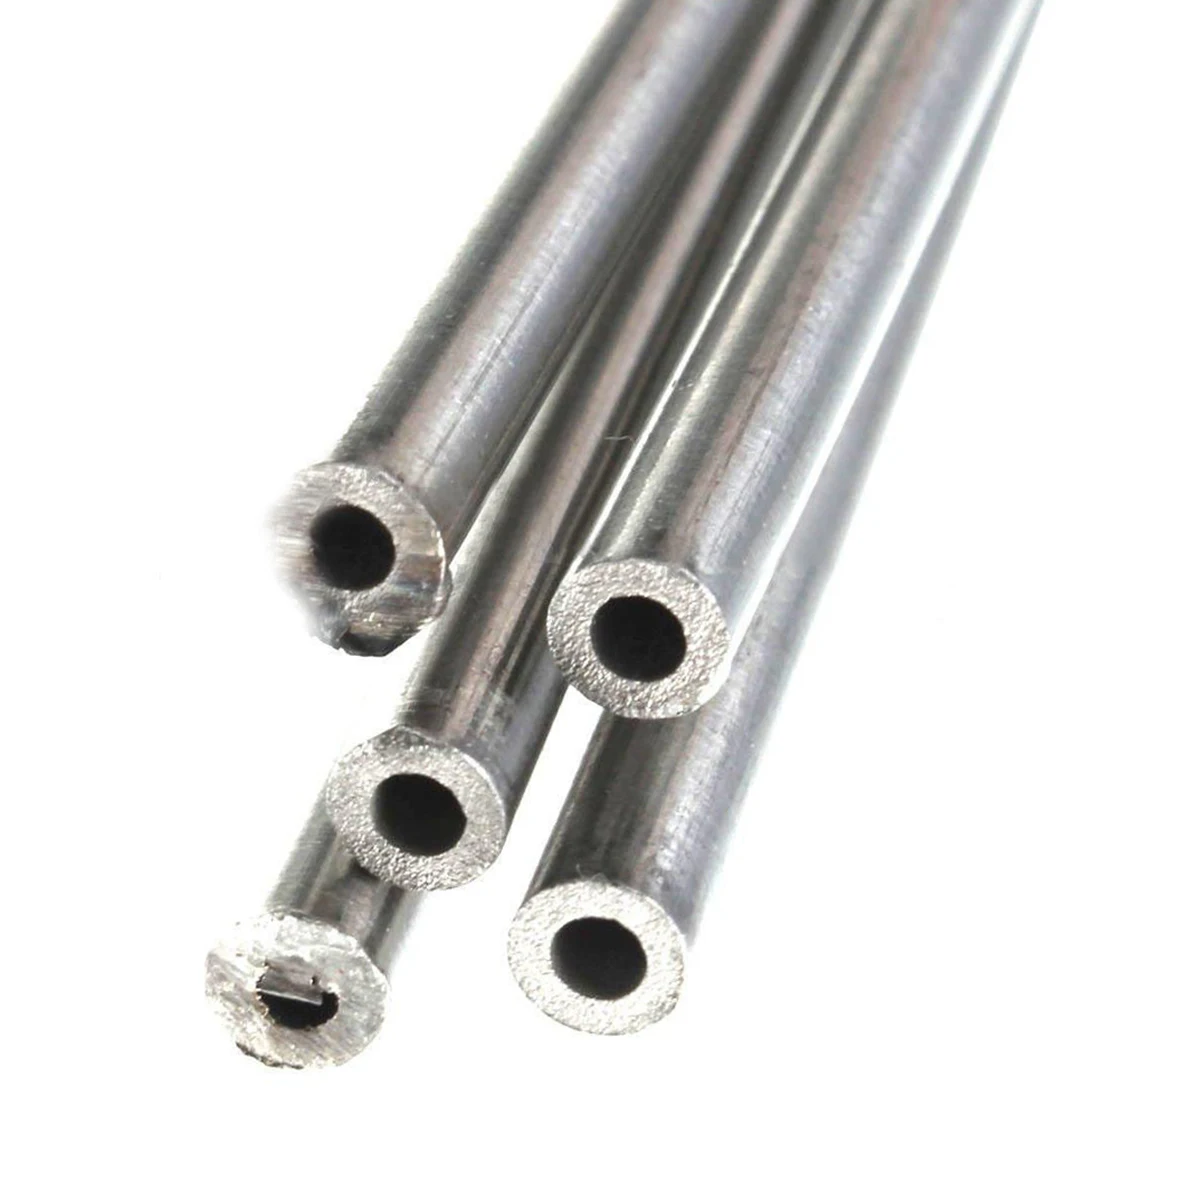 OD 10mm x 8mm ID Stainless Pipe 304 Stainless Steel Capillary Tube Length 500mm